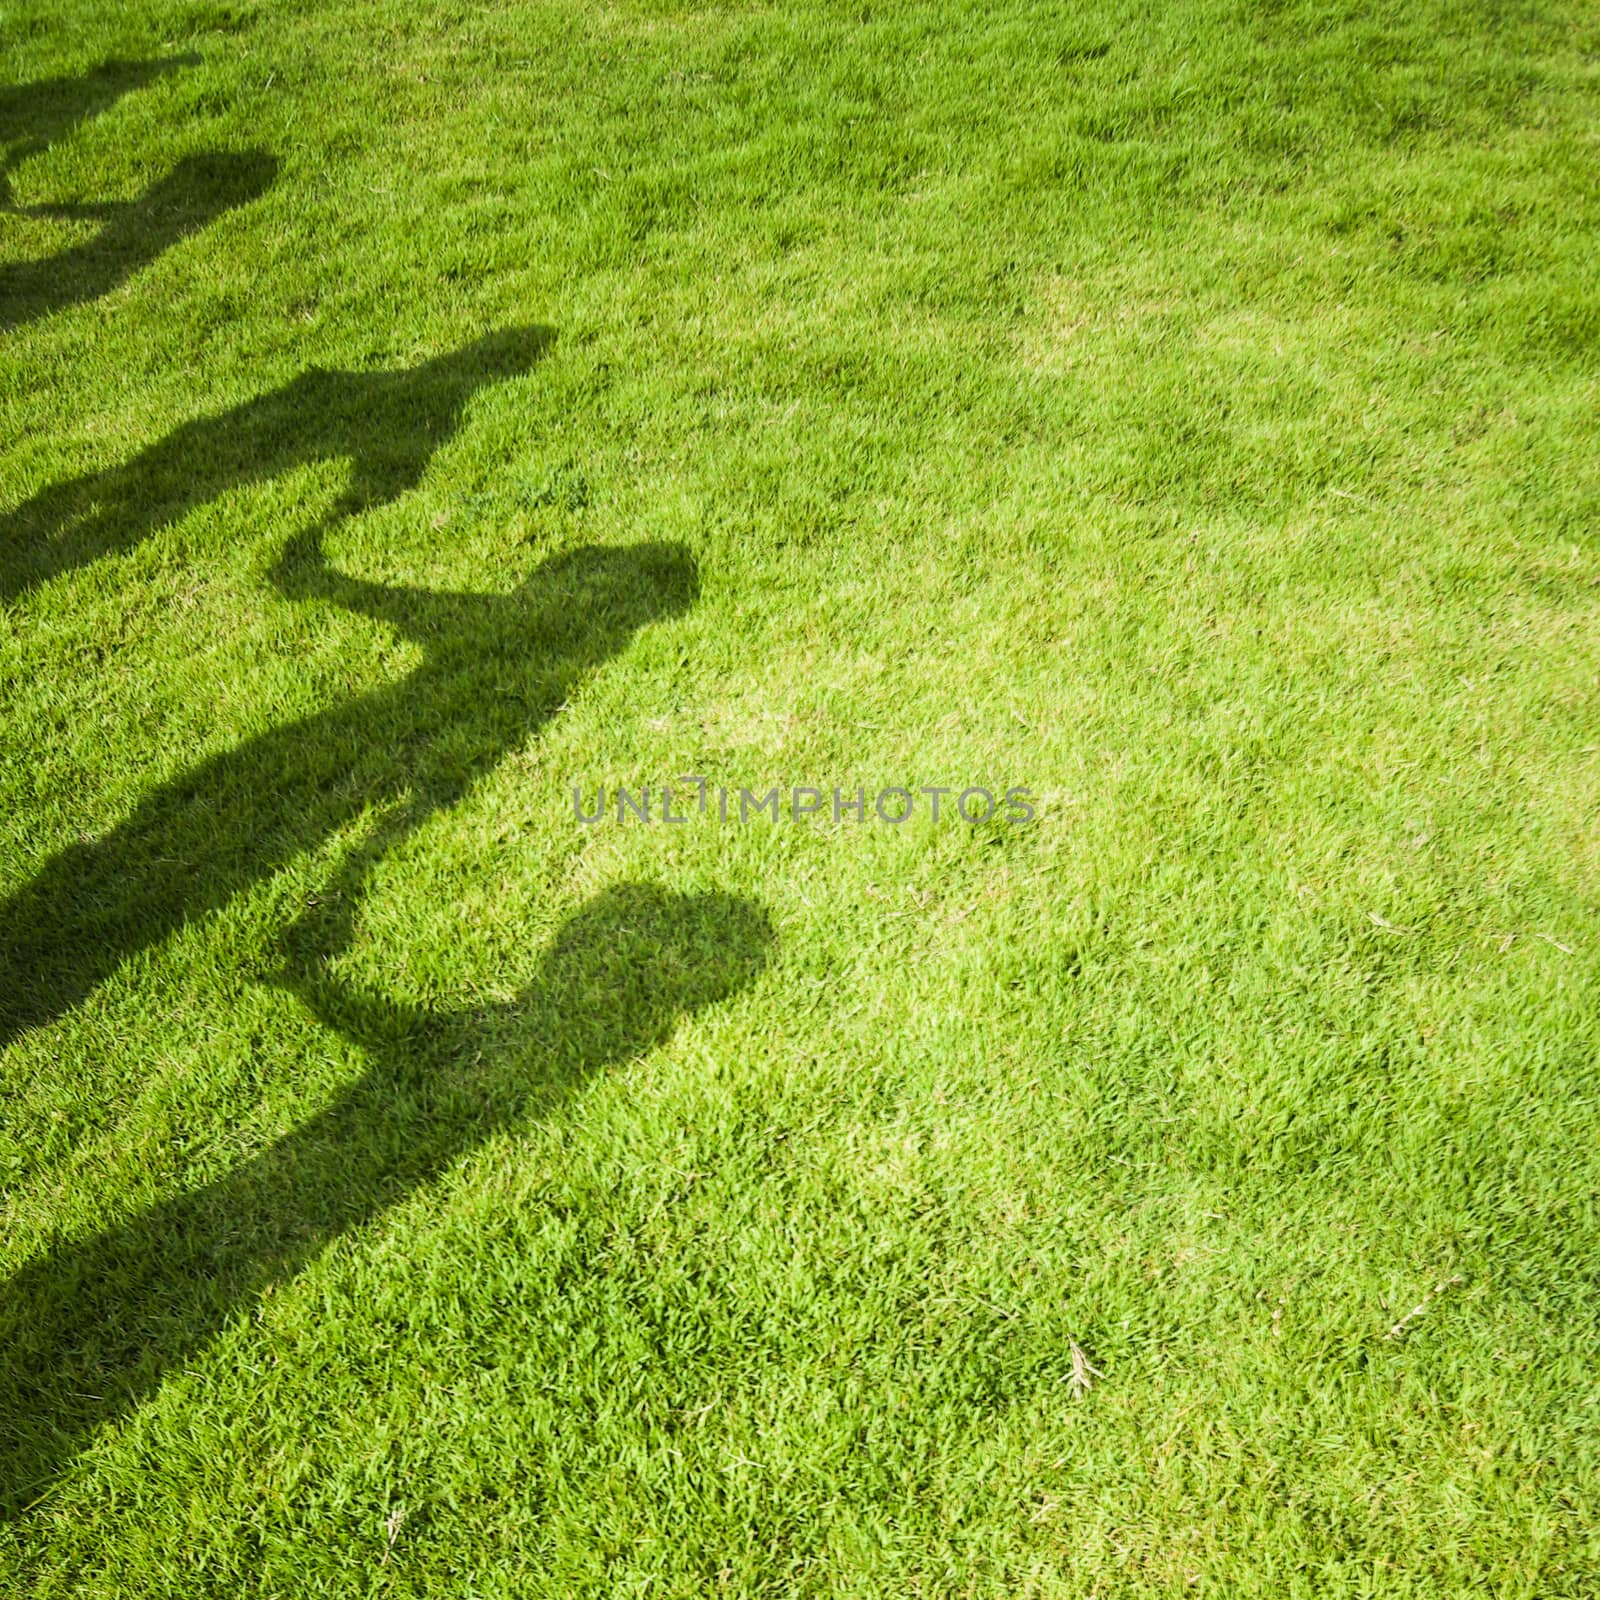 Group people shadow on green grass by 2nix